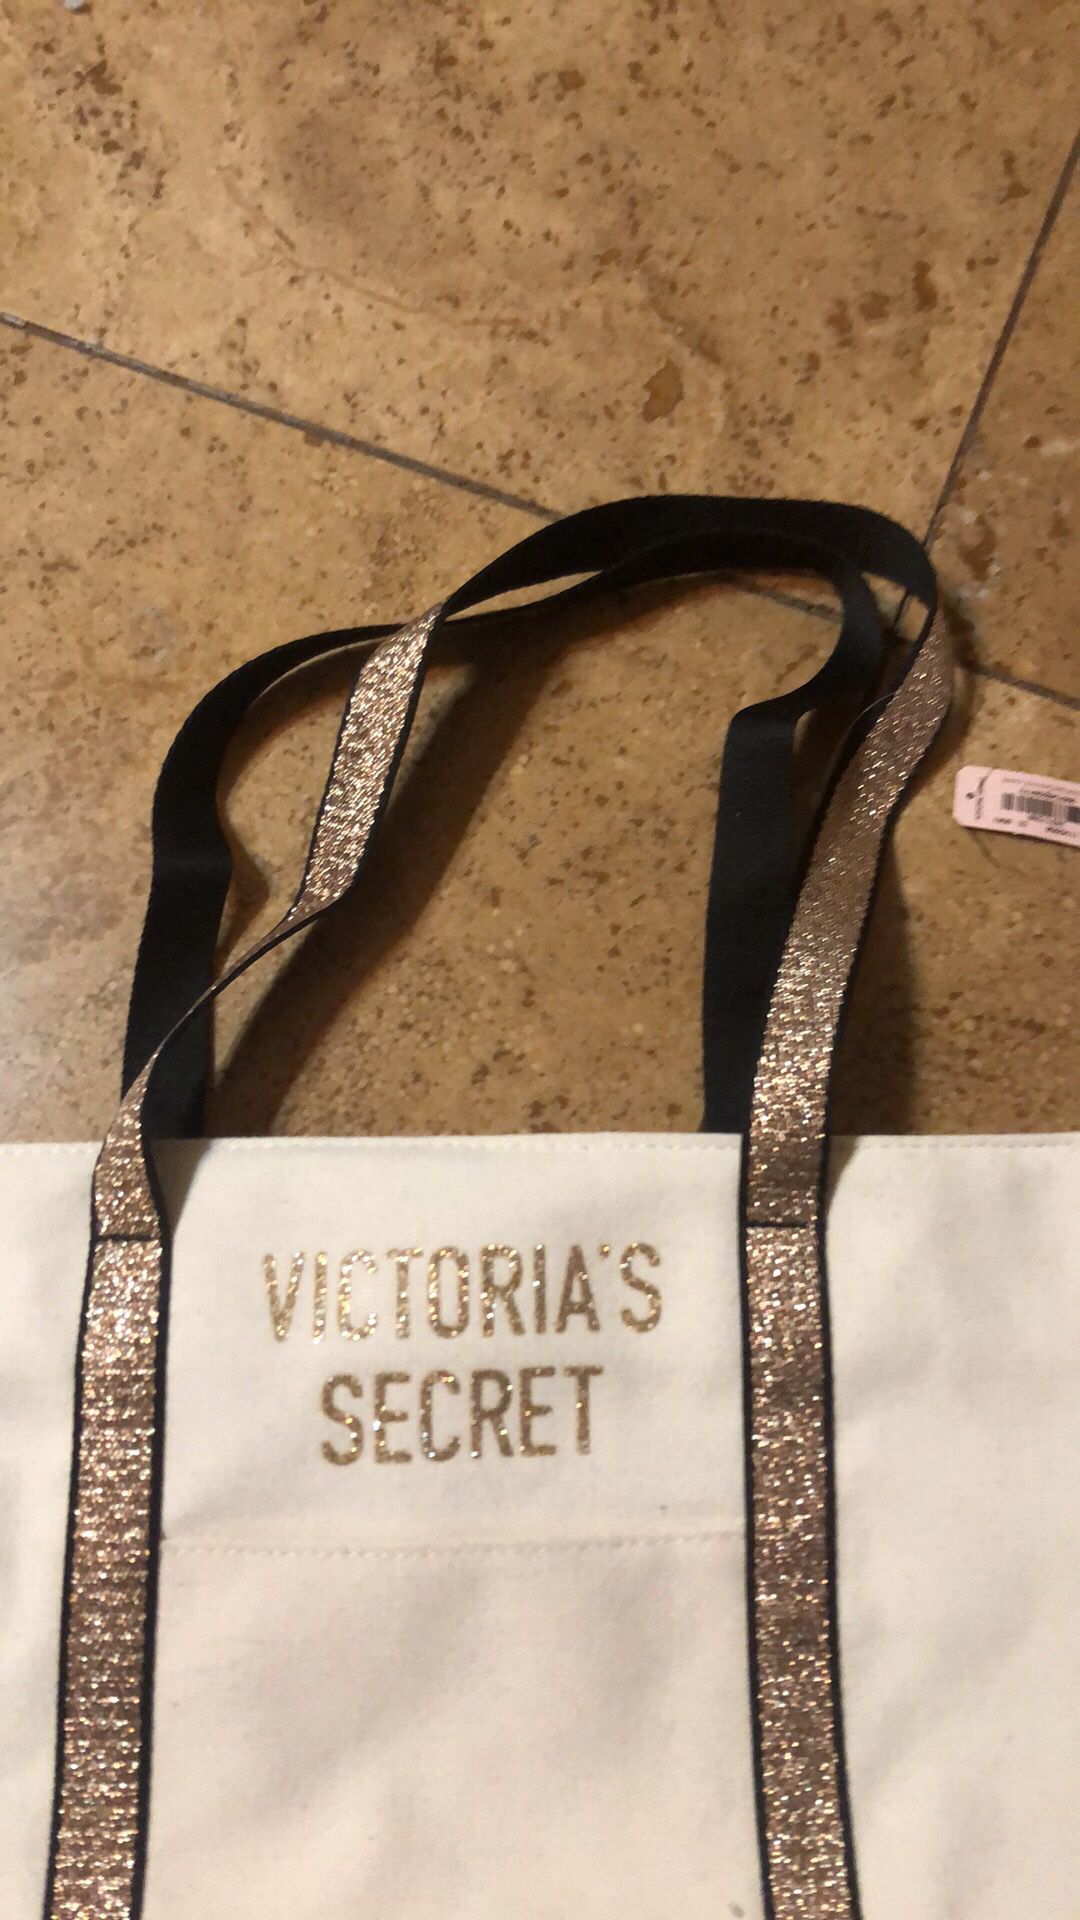 New Victoria Secret tote bag, canvas carry bag with glitter gold bag